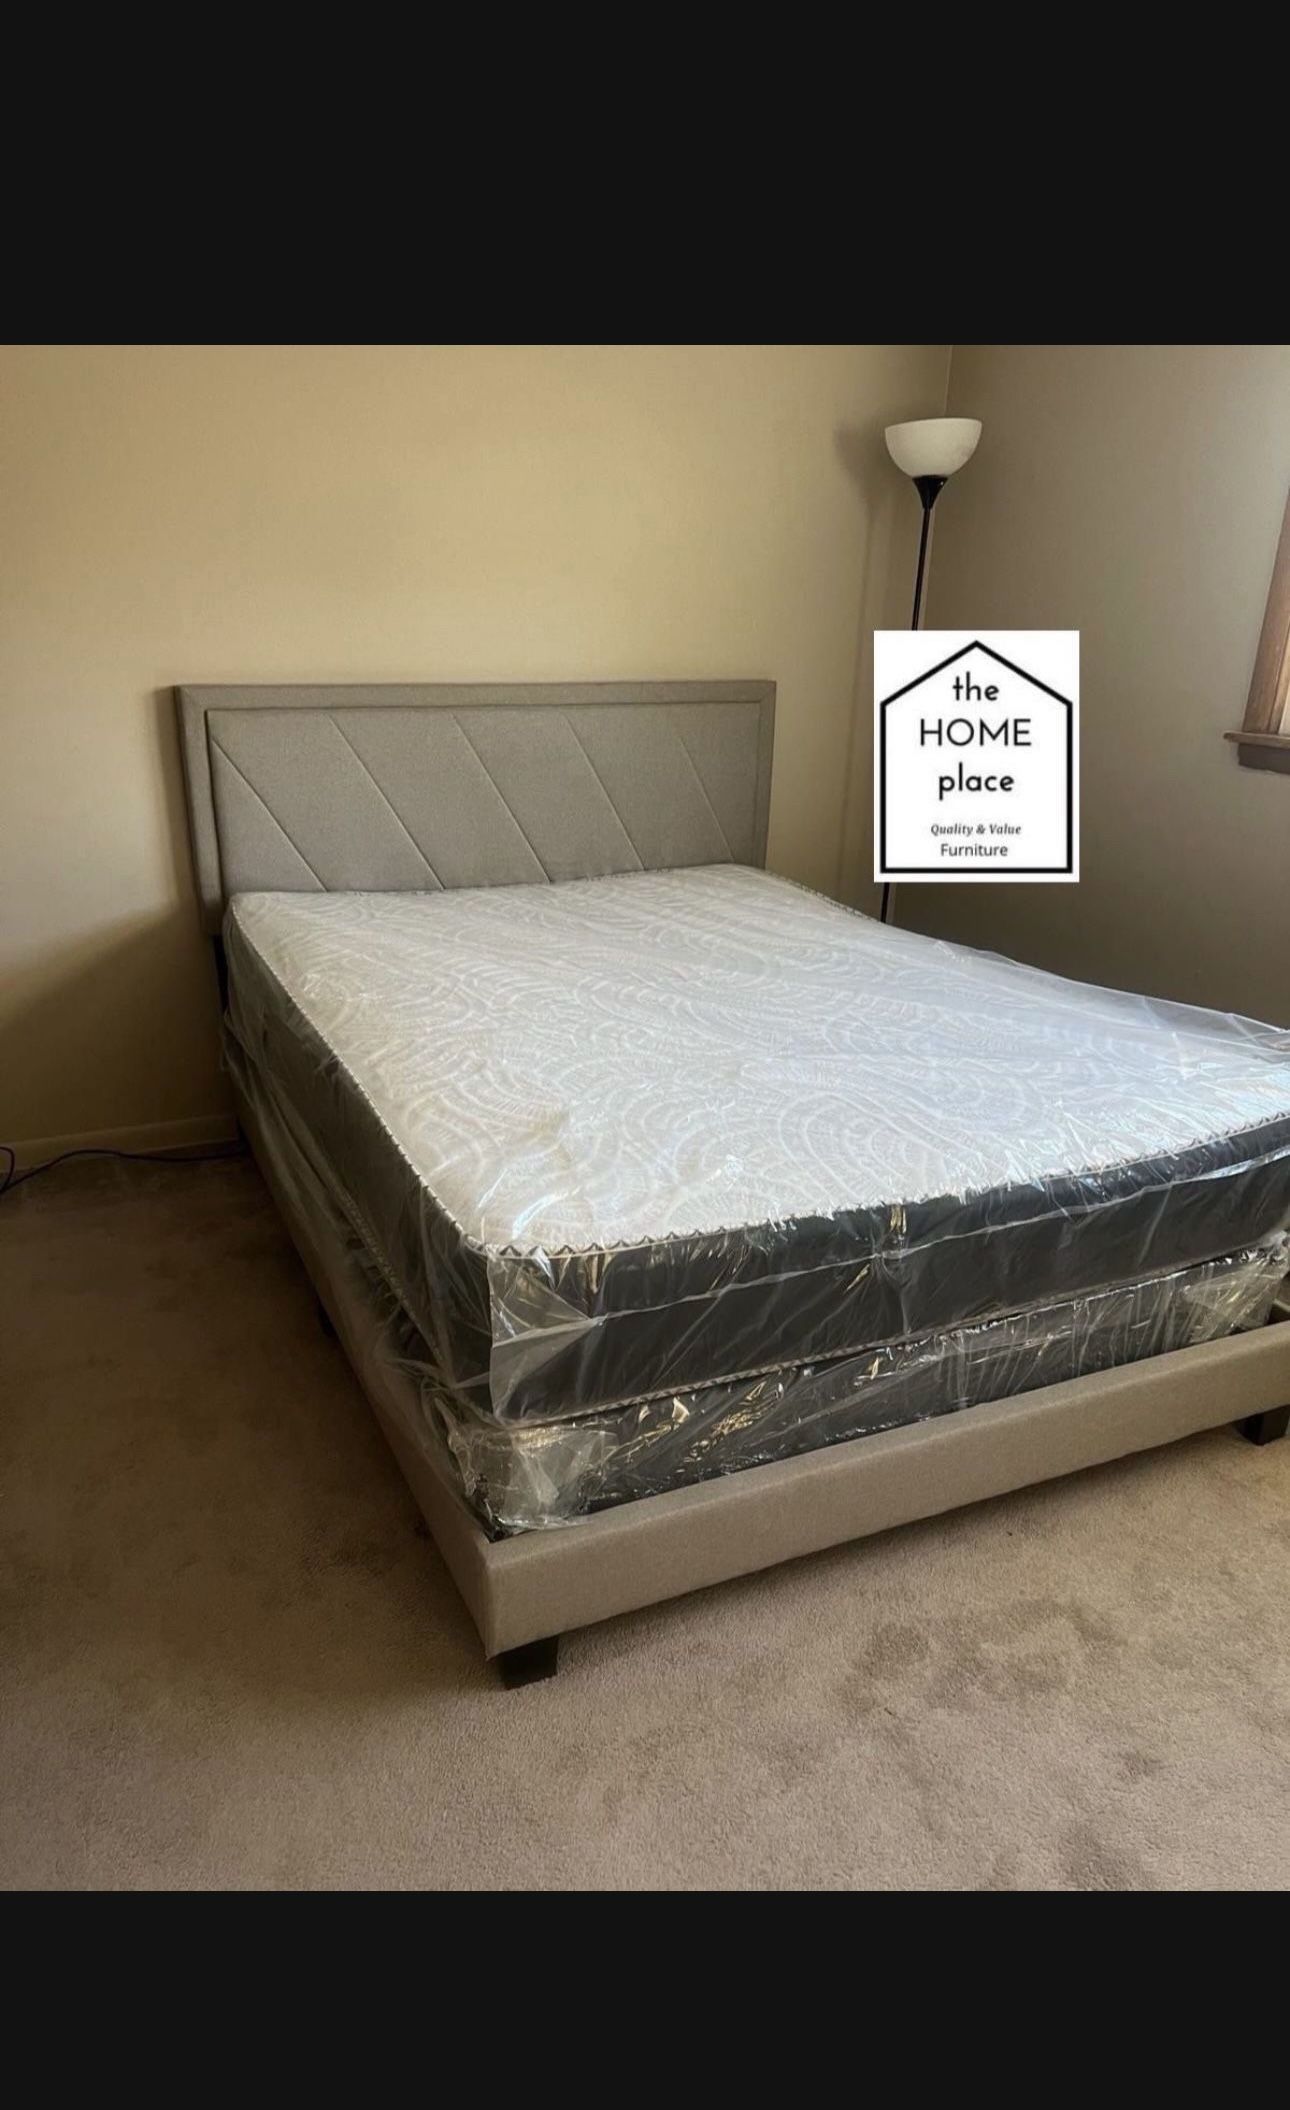 Brand New Queen Package Deal Includes Bed Frame, Mattress And Box Spring For Only $349!!  Ready For Delivery TODAY 🚛